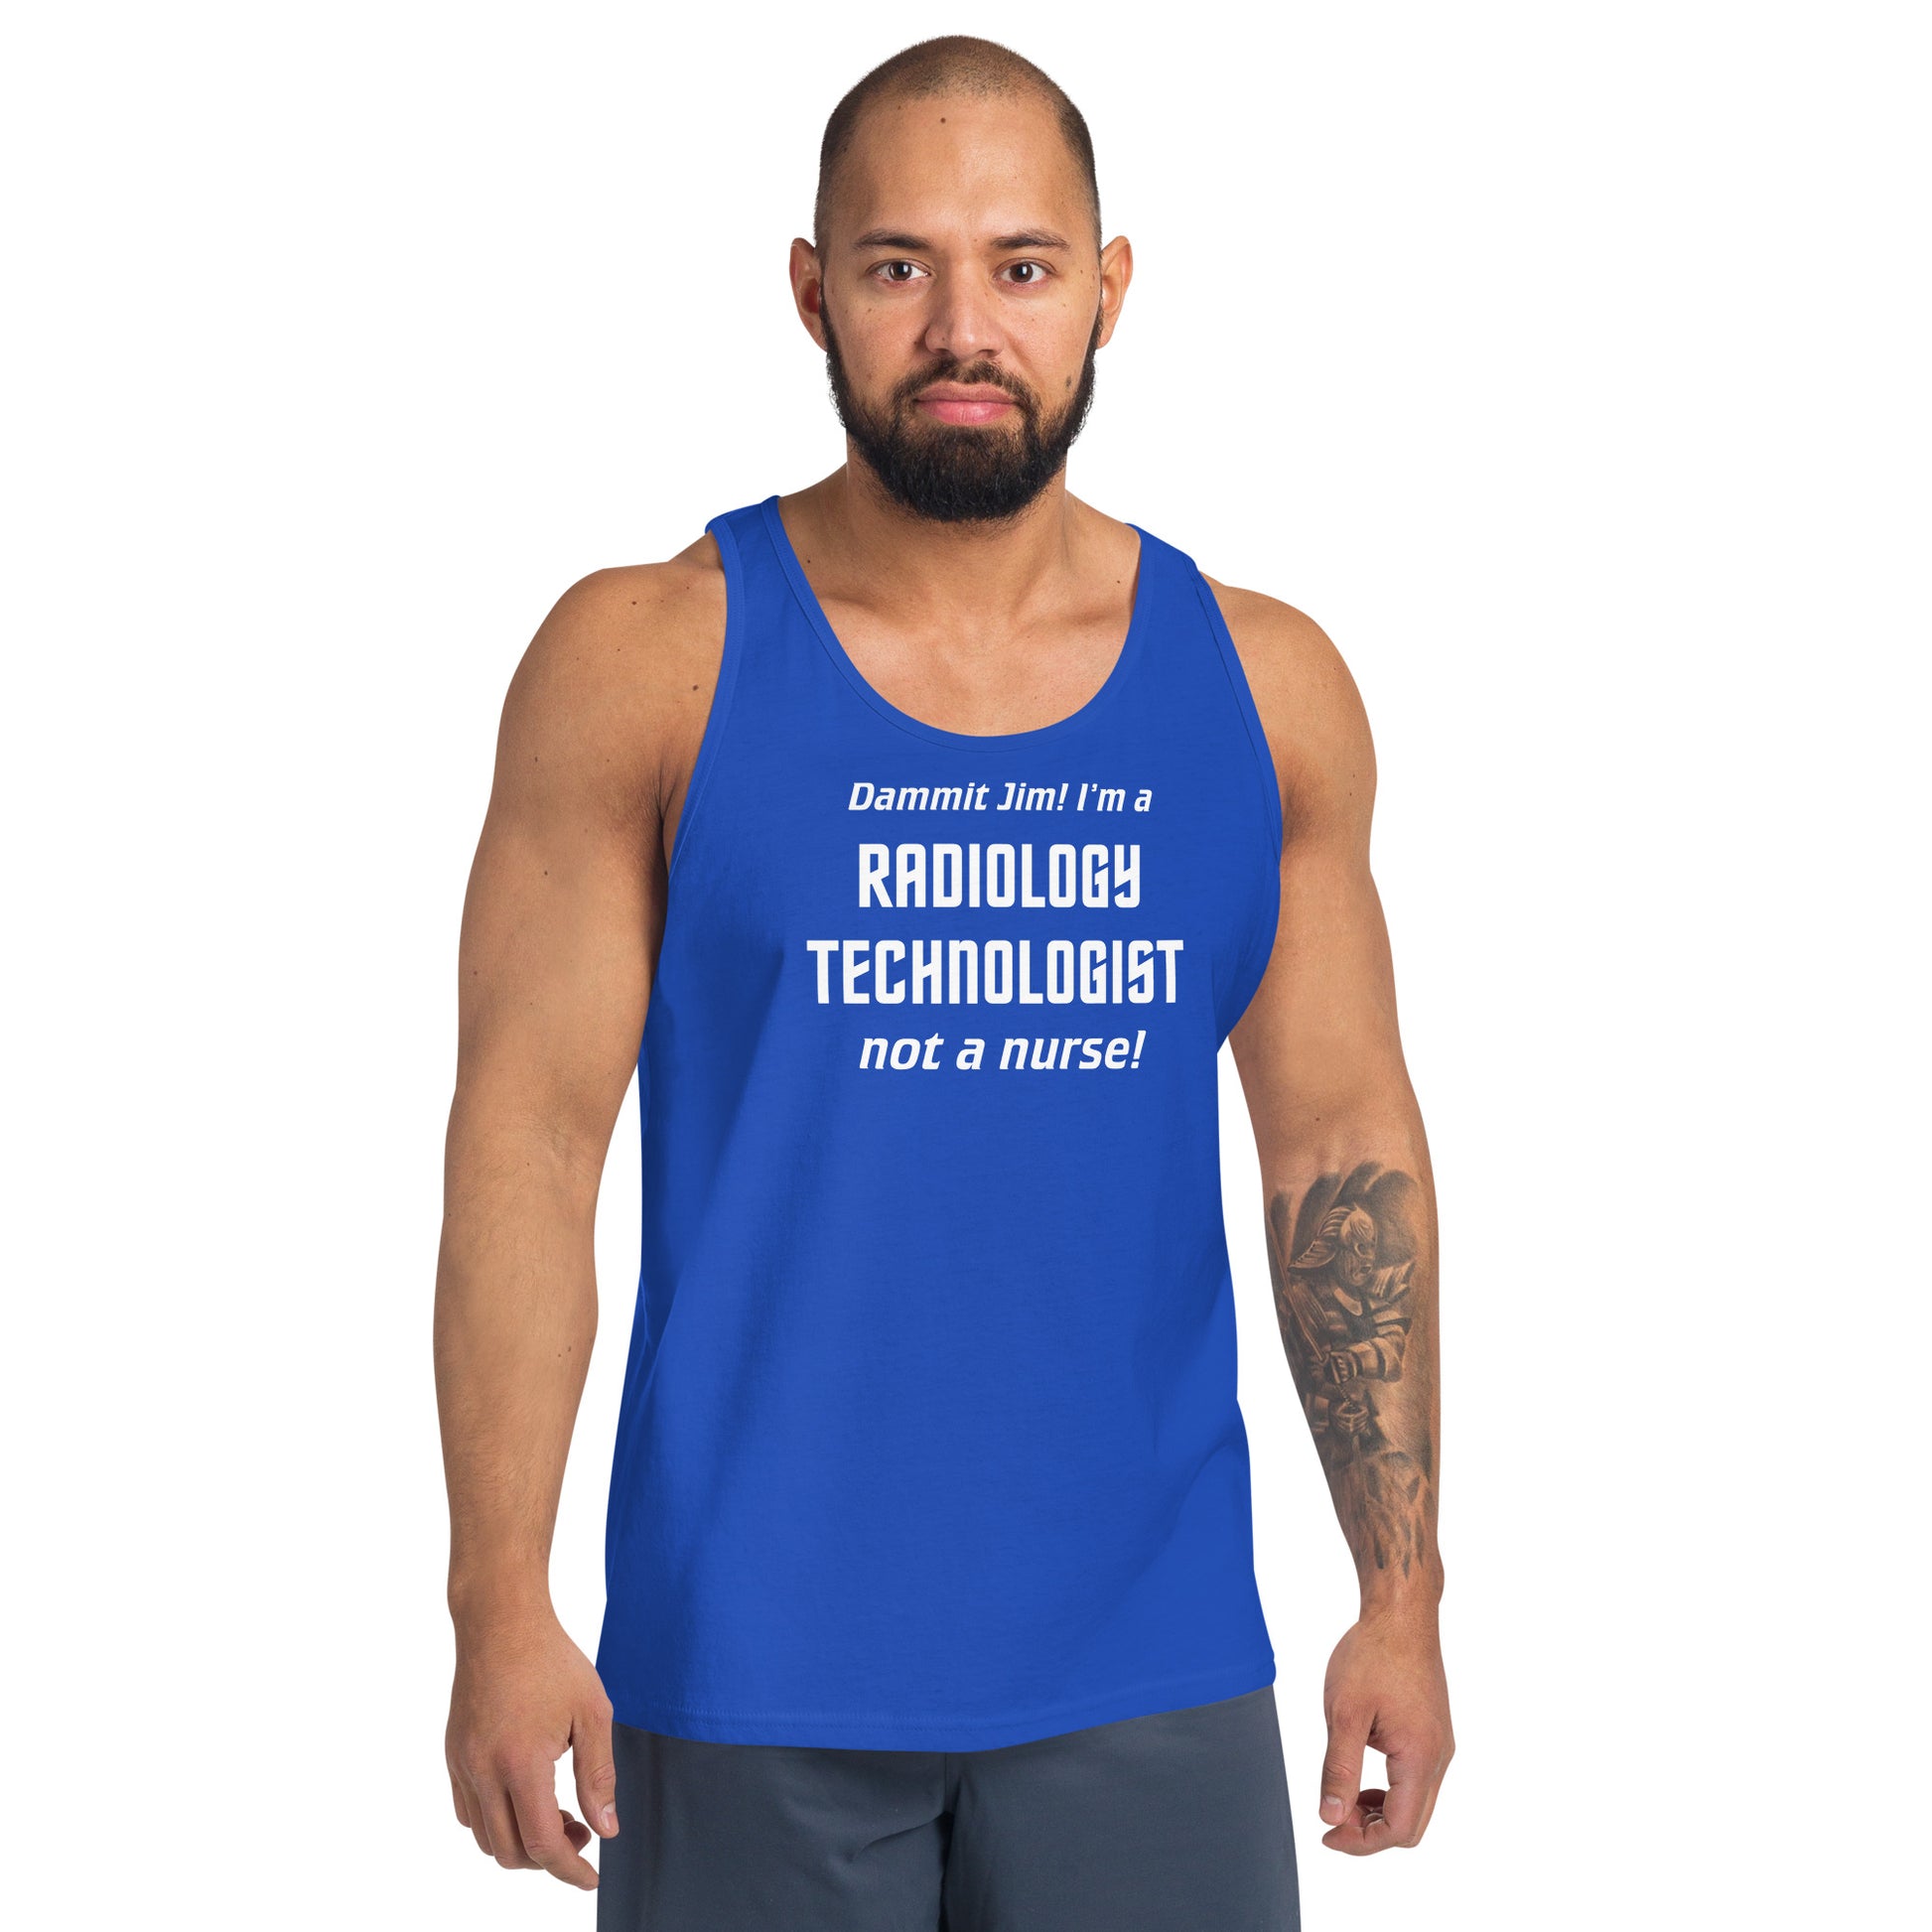 Model wearing True Royal blue unisex tank top with text graphic in Star Trek font: "Dammit Jim! I'm a RADIOLOGY TECHNOLOGIST not a nurse!"